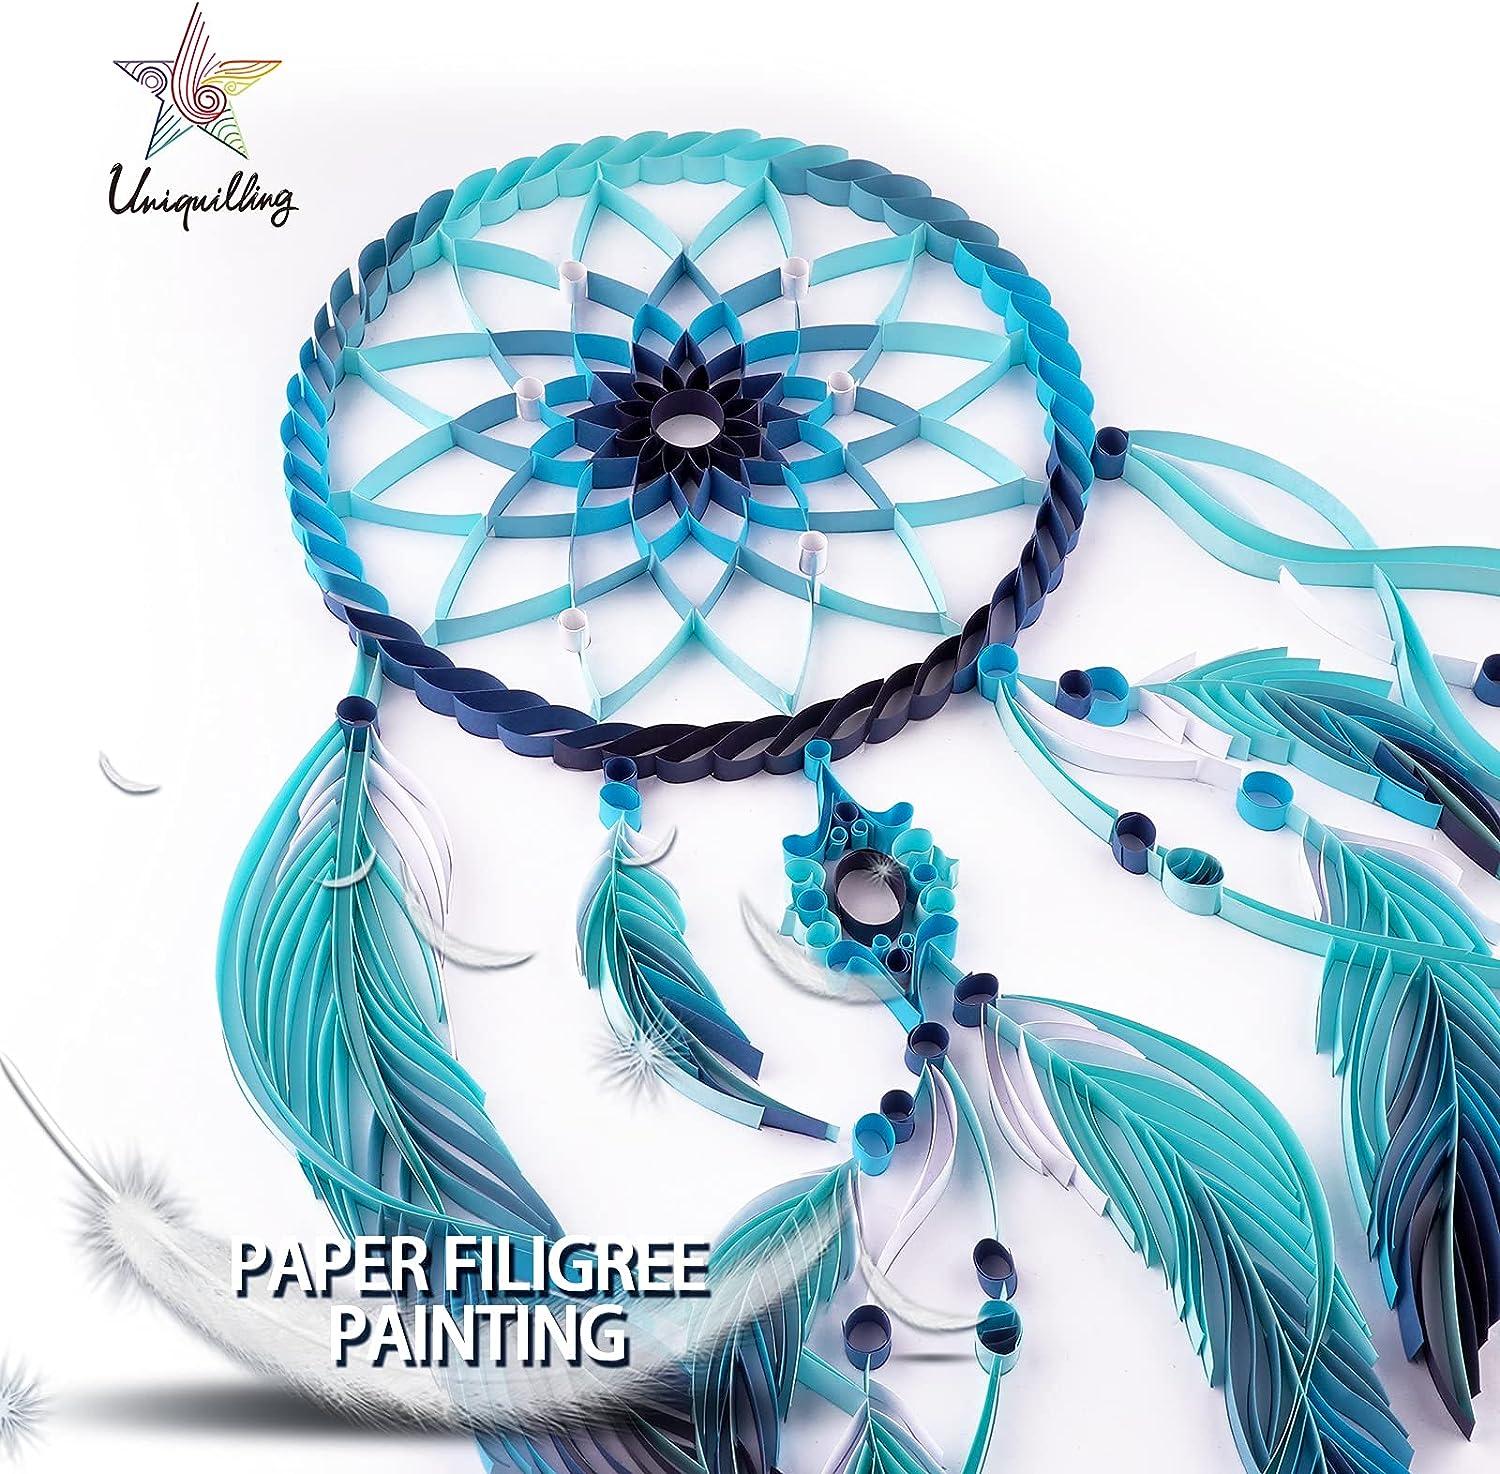 Uniquilling Quilling Paper Quilling Kit for Adults Beginner, 16 * 20-inch  Blue Dragon, Exquisite DIY Paper Filigree Painting Kits Quilling Tools,  Home